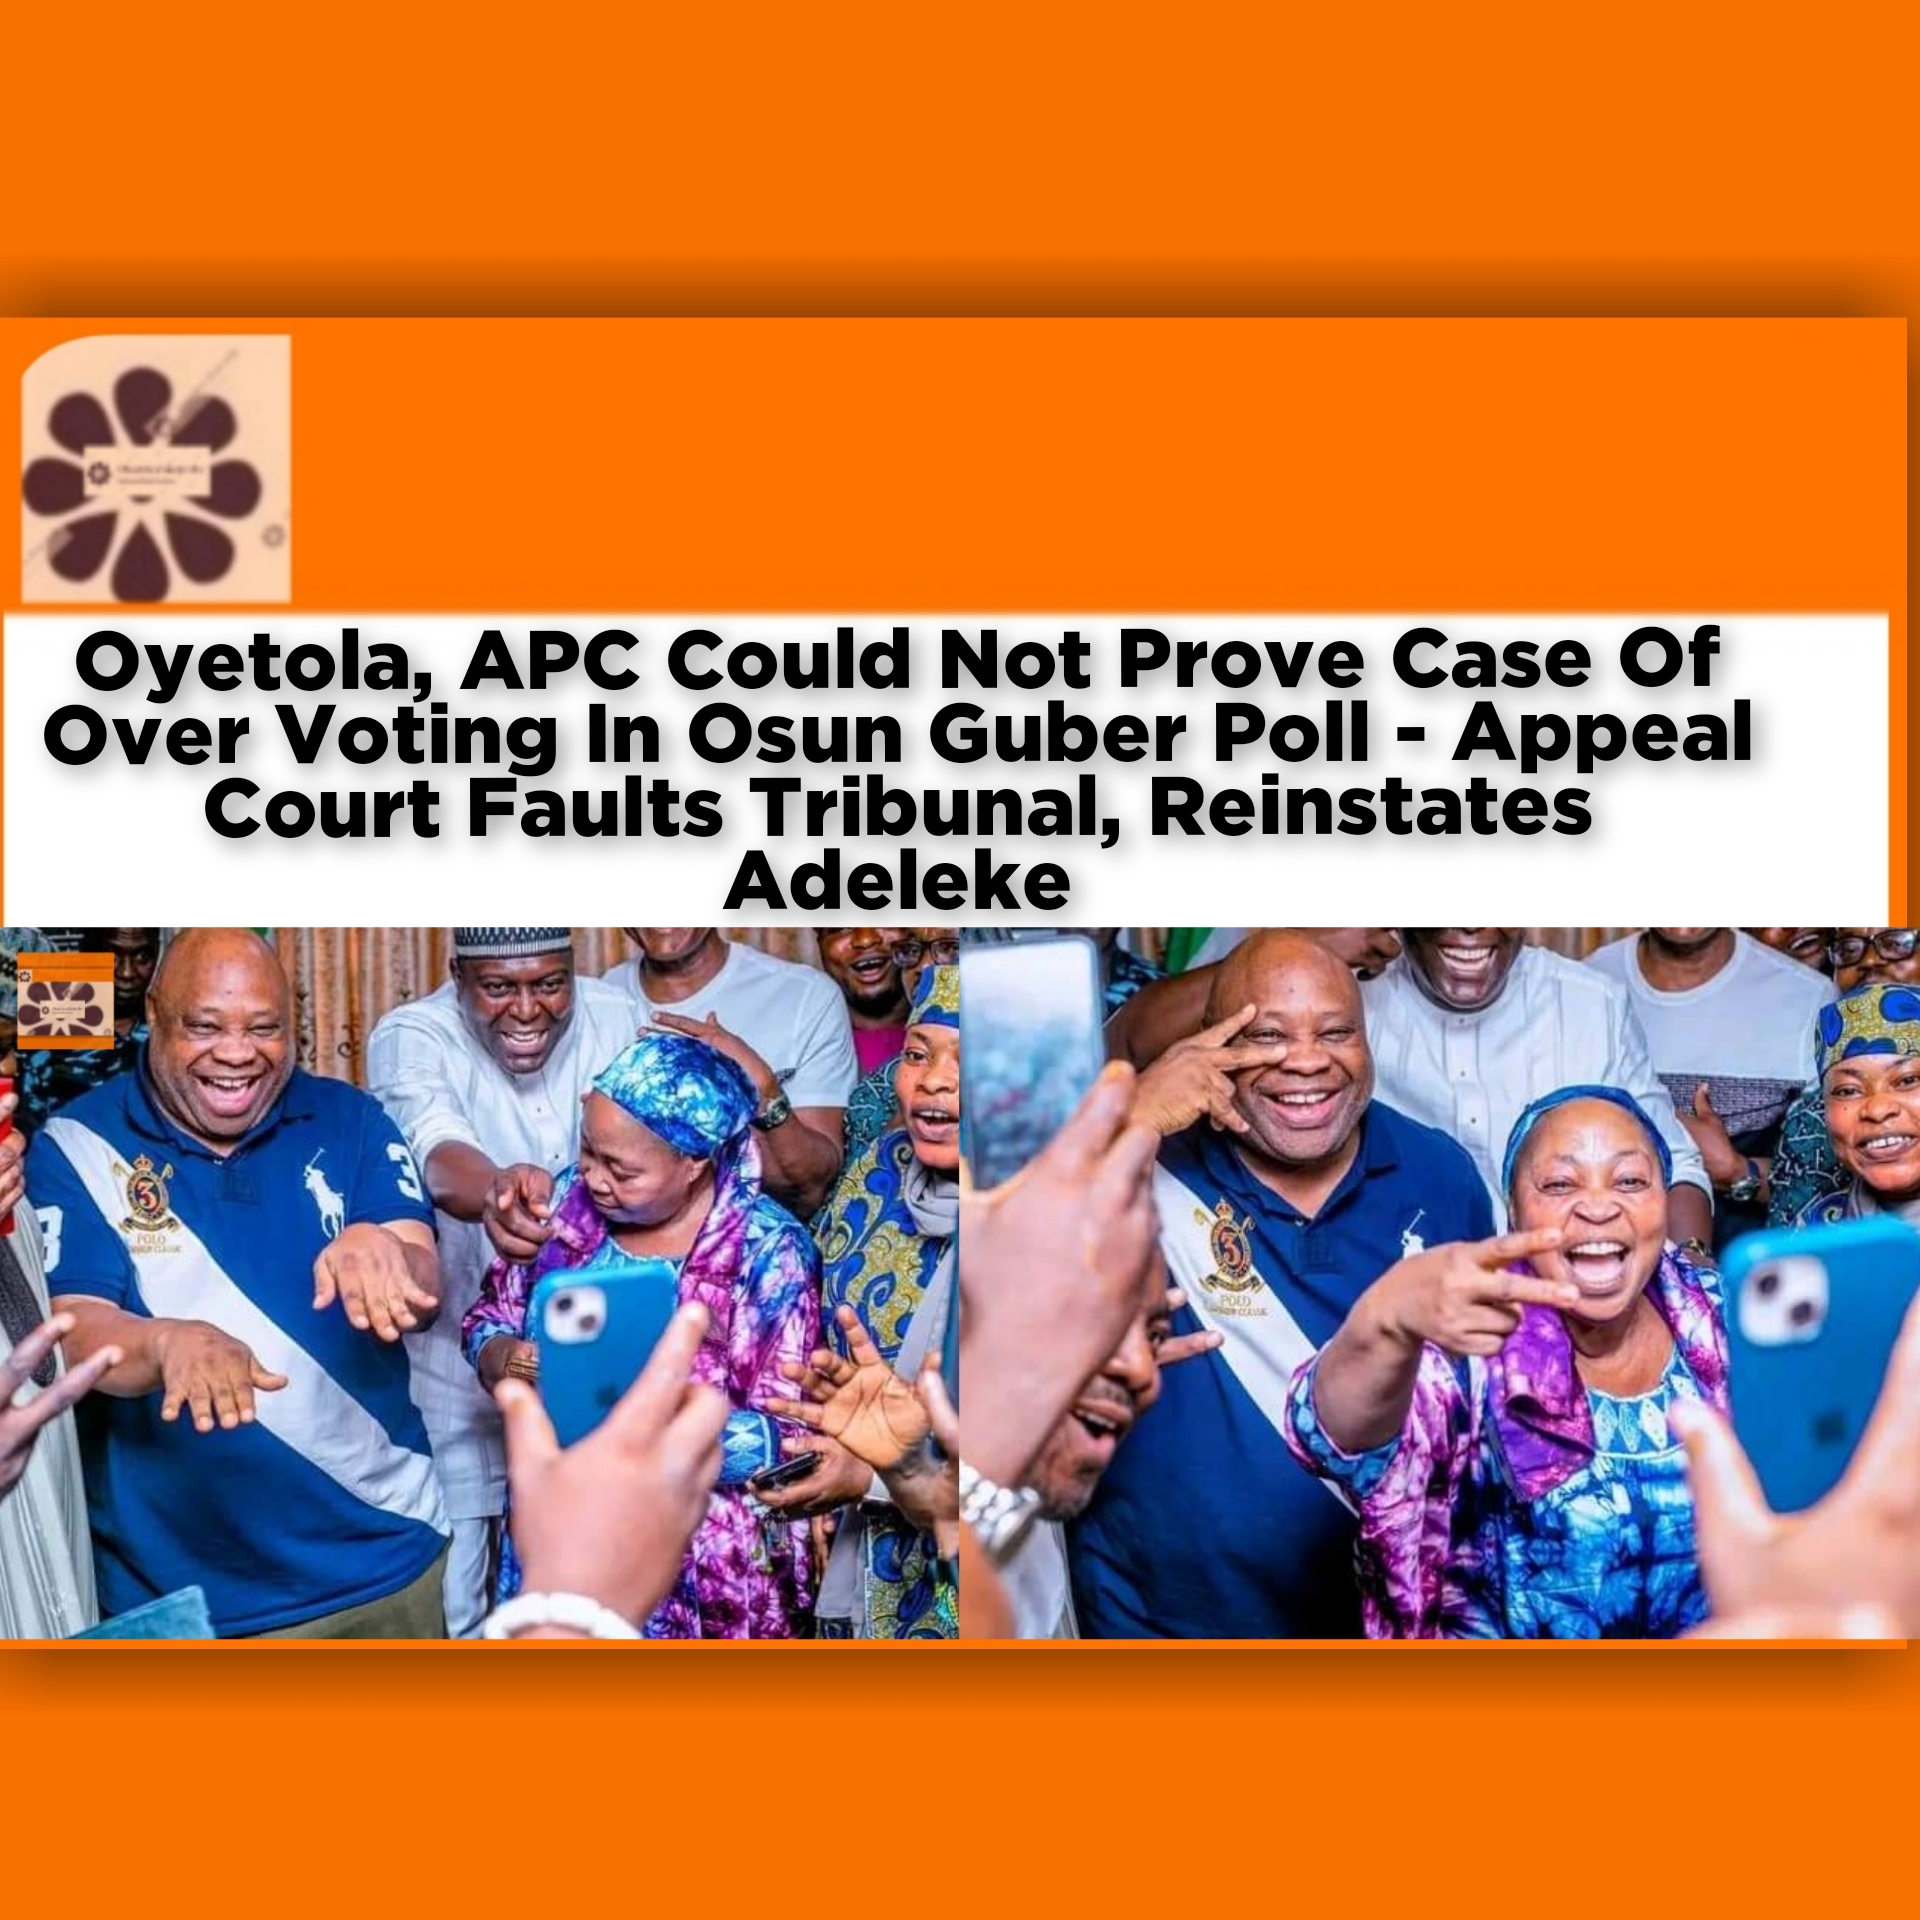 Oyetola, APC Could Not Prove Case Of Over Voting In Osun Guber Poll - Appeal Court Faults Tribunal, Reinstates Adeleke ~ OsazuwaAkonedo #Marriage